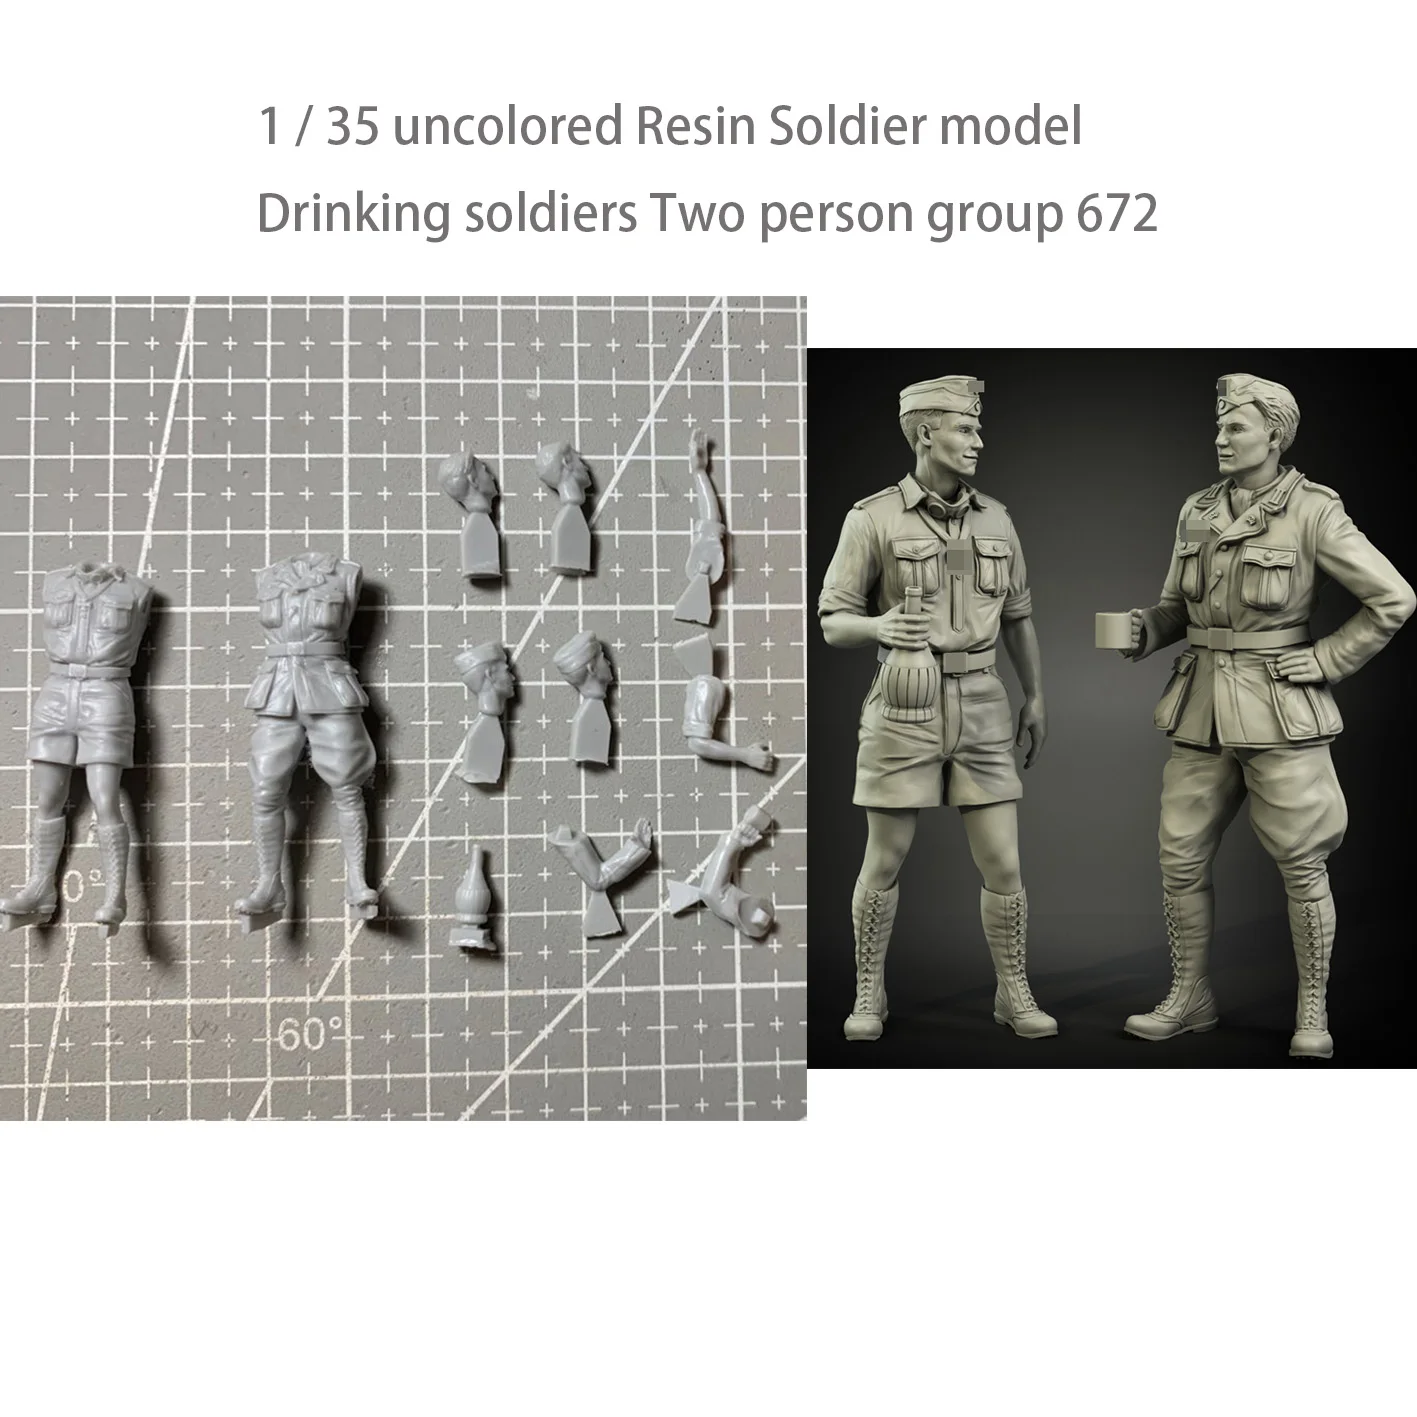 

1 / 35 uncolored Resin Soldier model Drinking soldiers Two person group 672